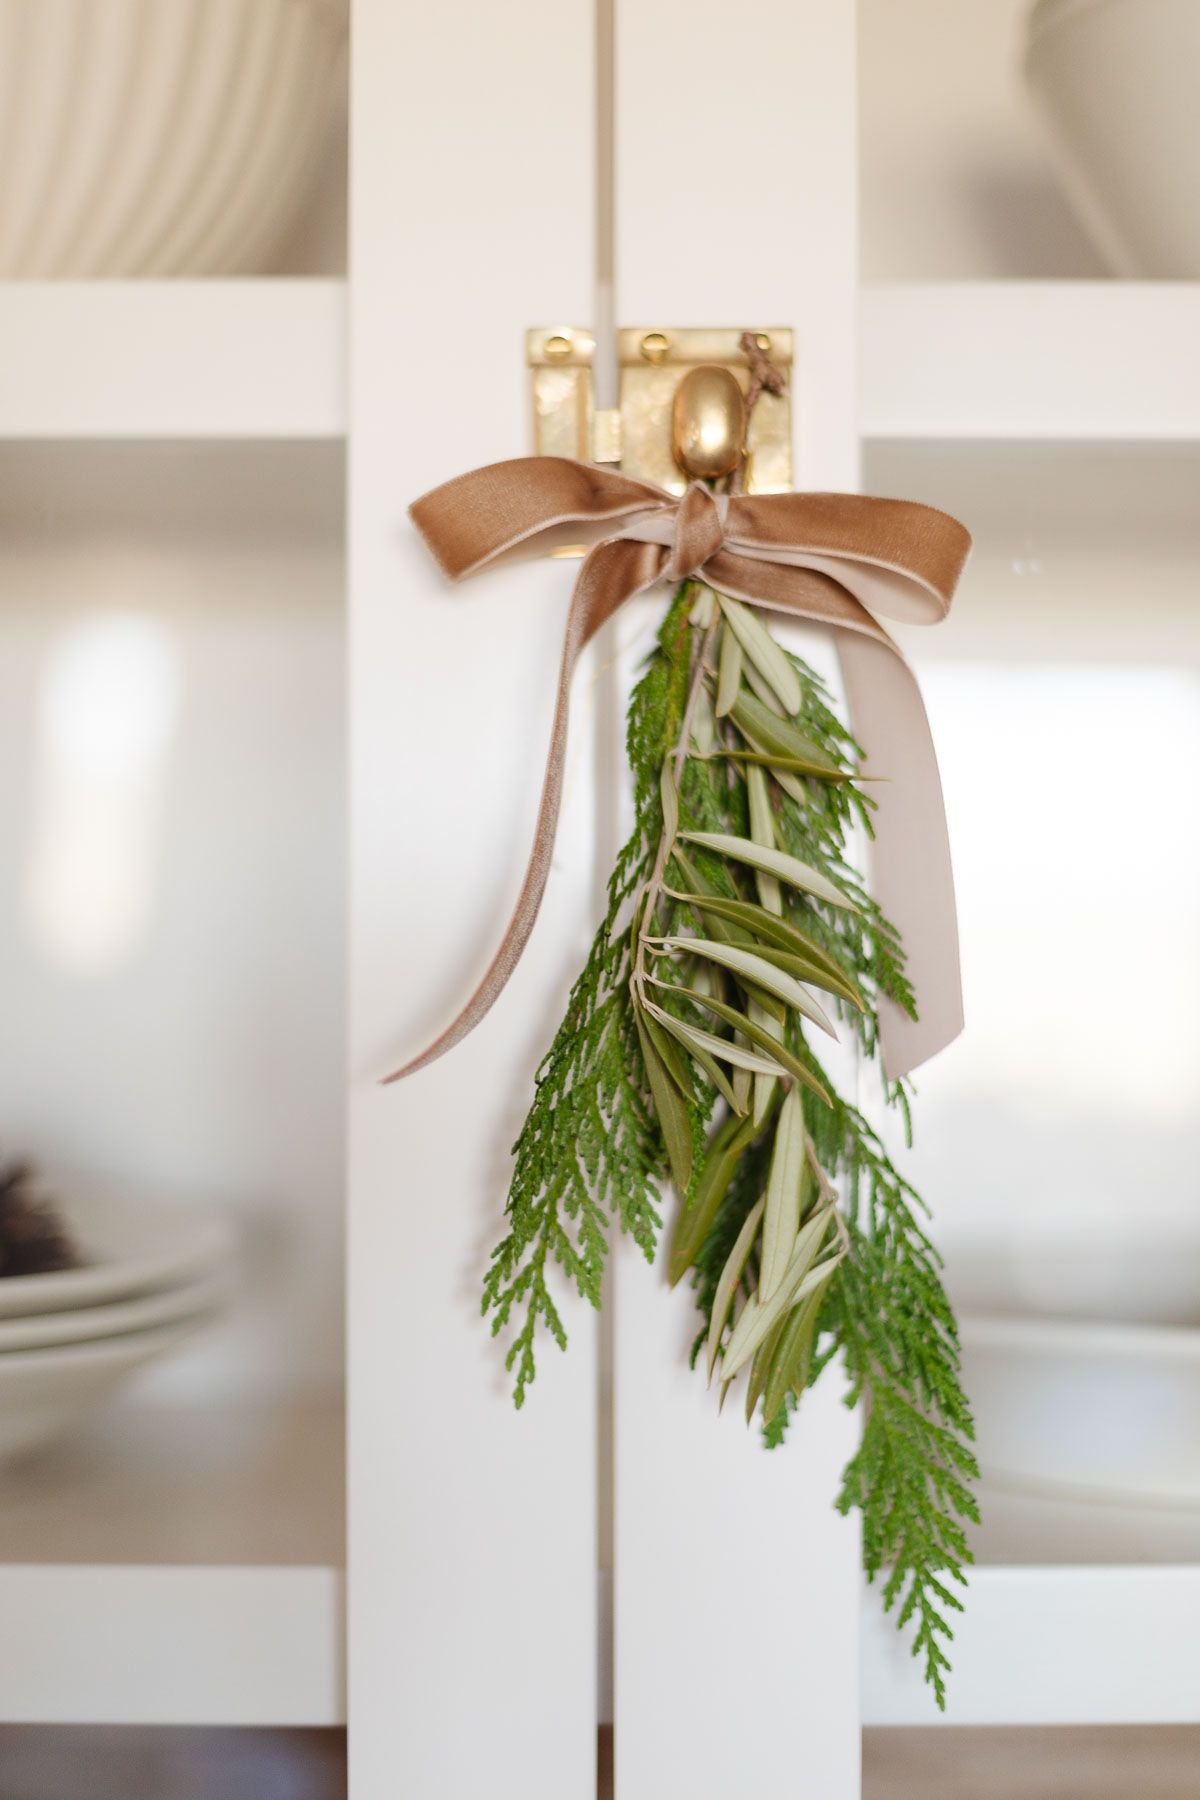 Fresh Christmas greenery tied with a bow on a brass cabinet pull.